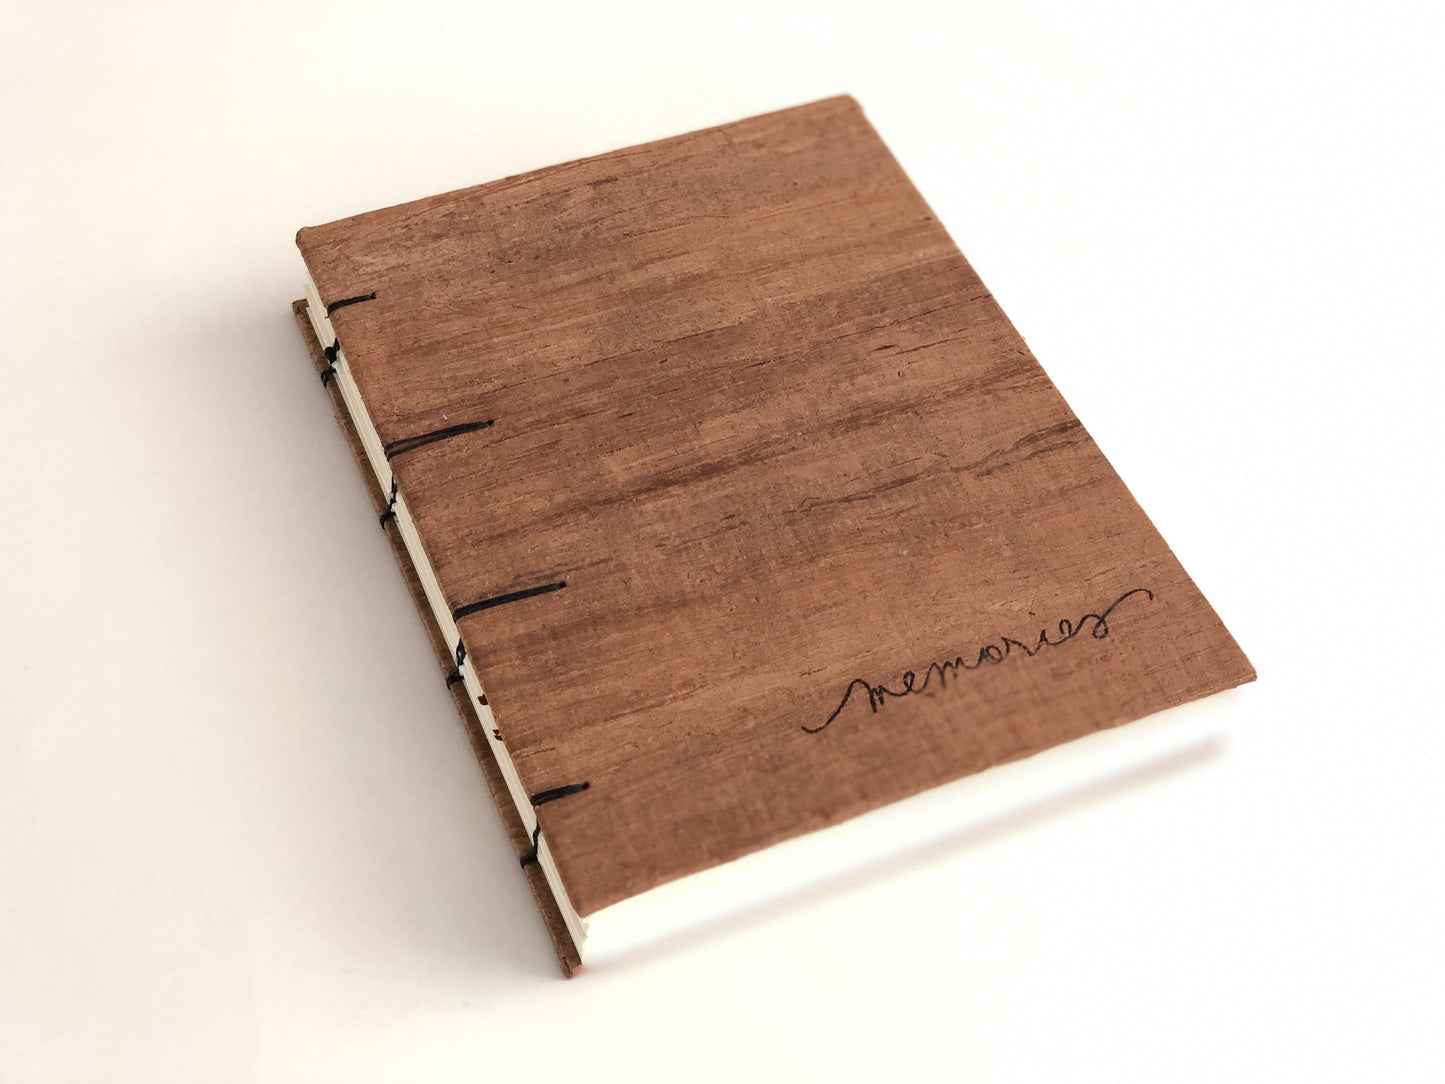 Wooden Journal Diary "Memories", Blank Scrapbook, Wedding Guest Book, Eco Journal Notebook gift, Creative bookish gift for him